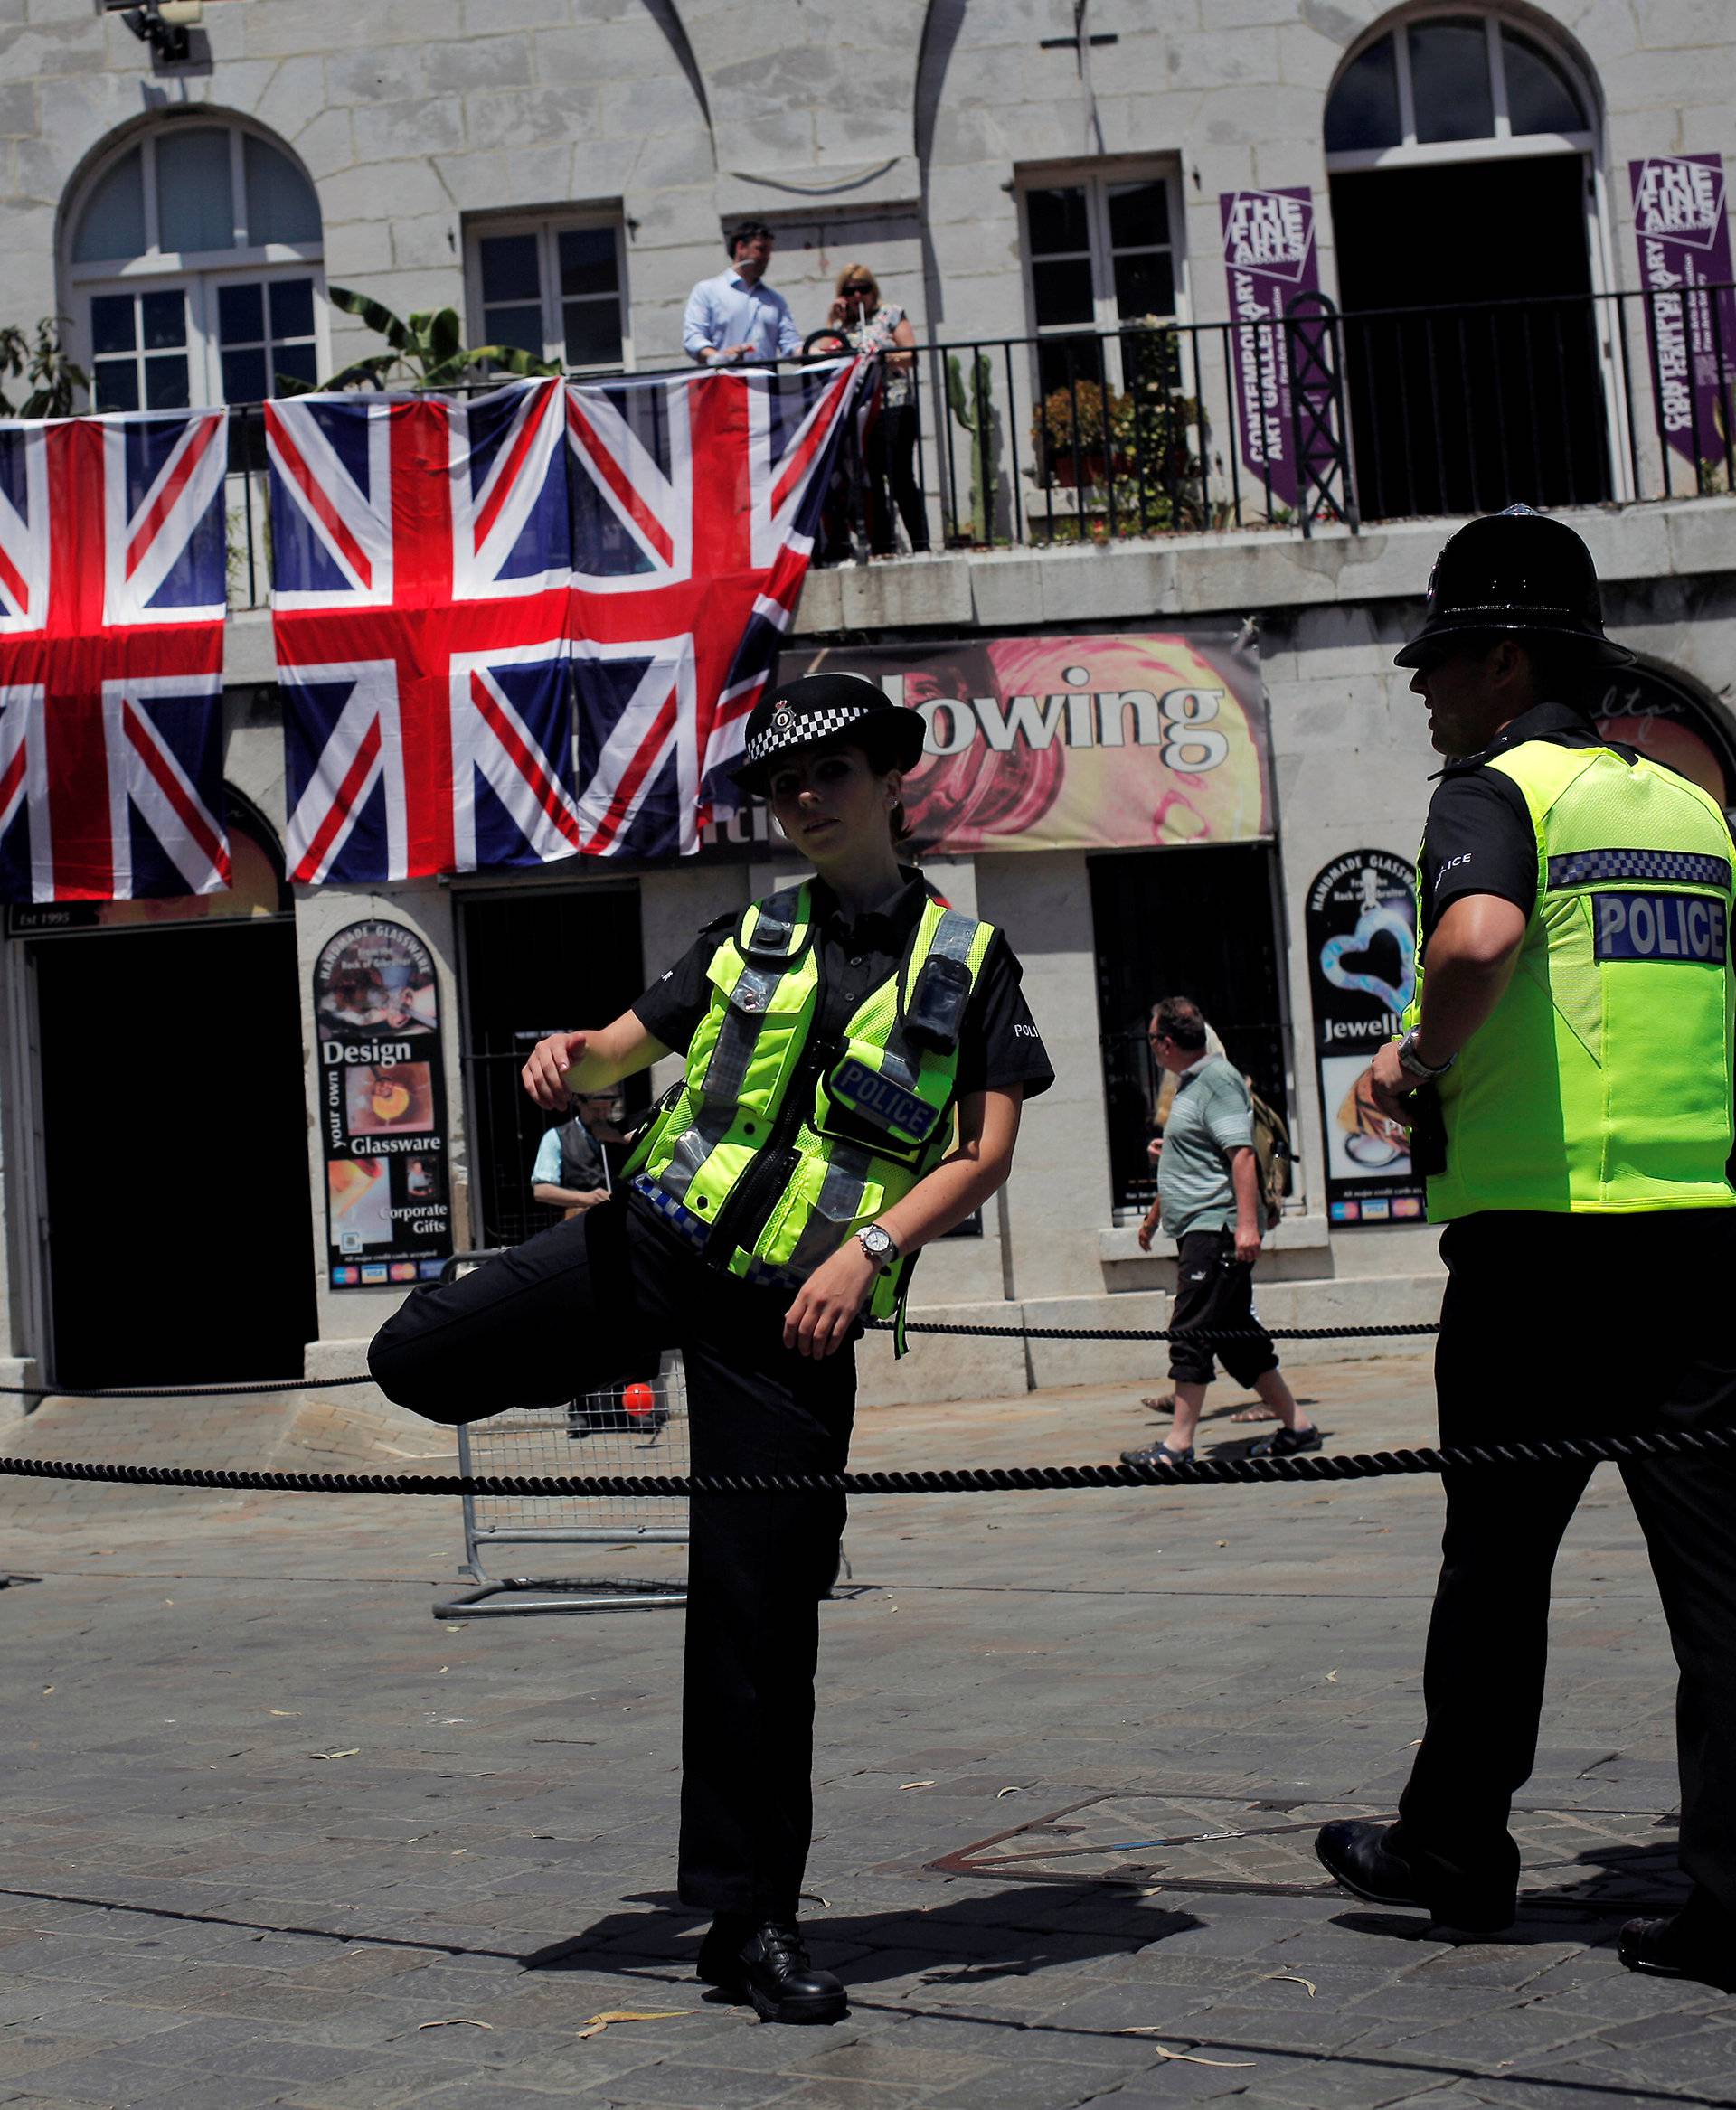 Gibraltarian police officers patrol Casemates square before the cancellation of the "Stronger In" campaign event before the death of lawmaker Jo Cox, in the British overseas territory Gibraltar, historically claimed by Spain